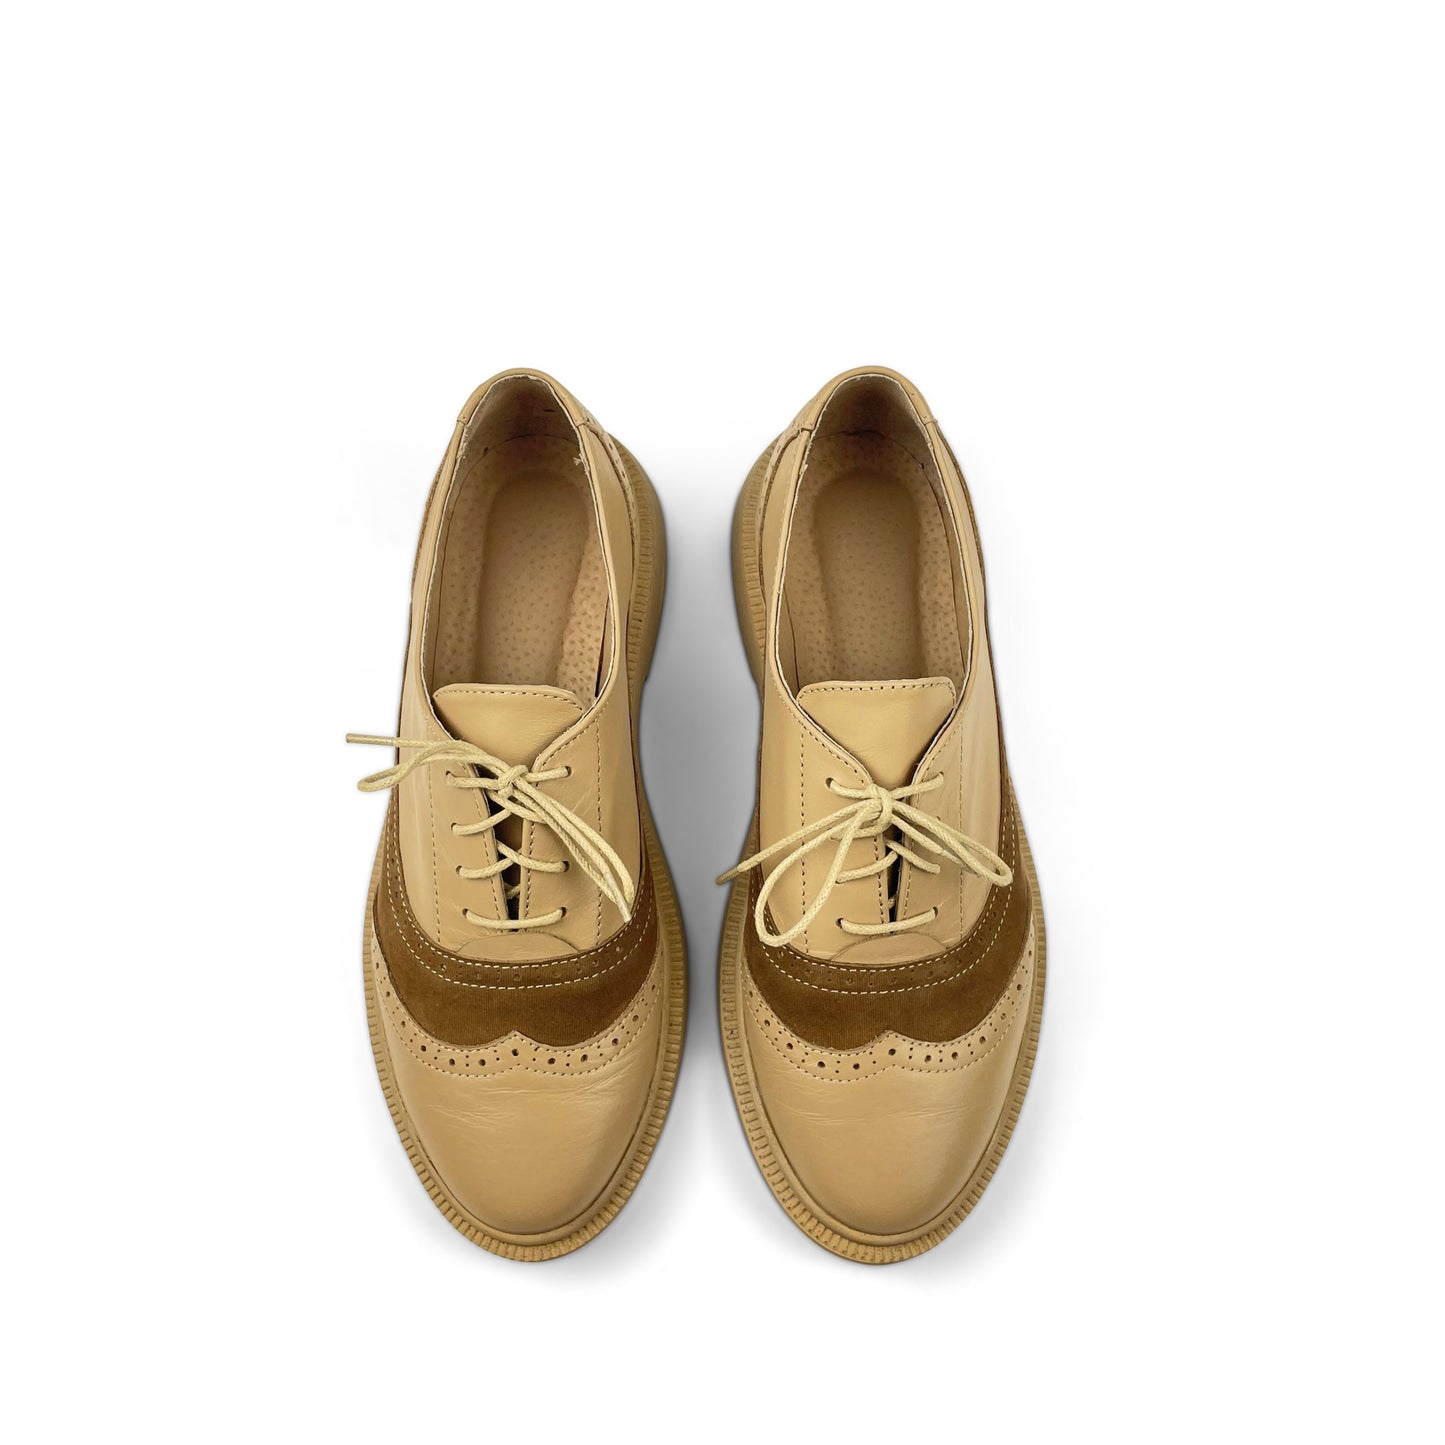 Two-Tone Leather Oxford Platform Shoes